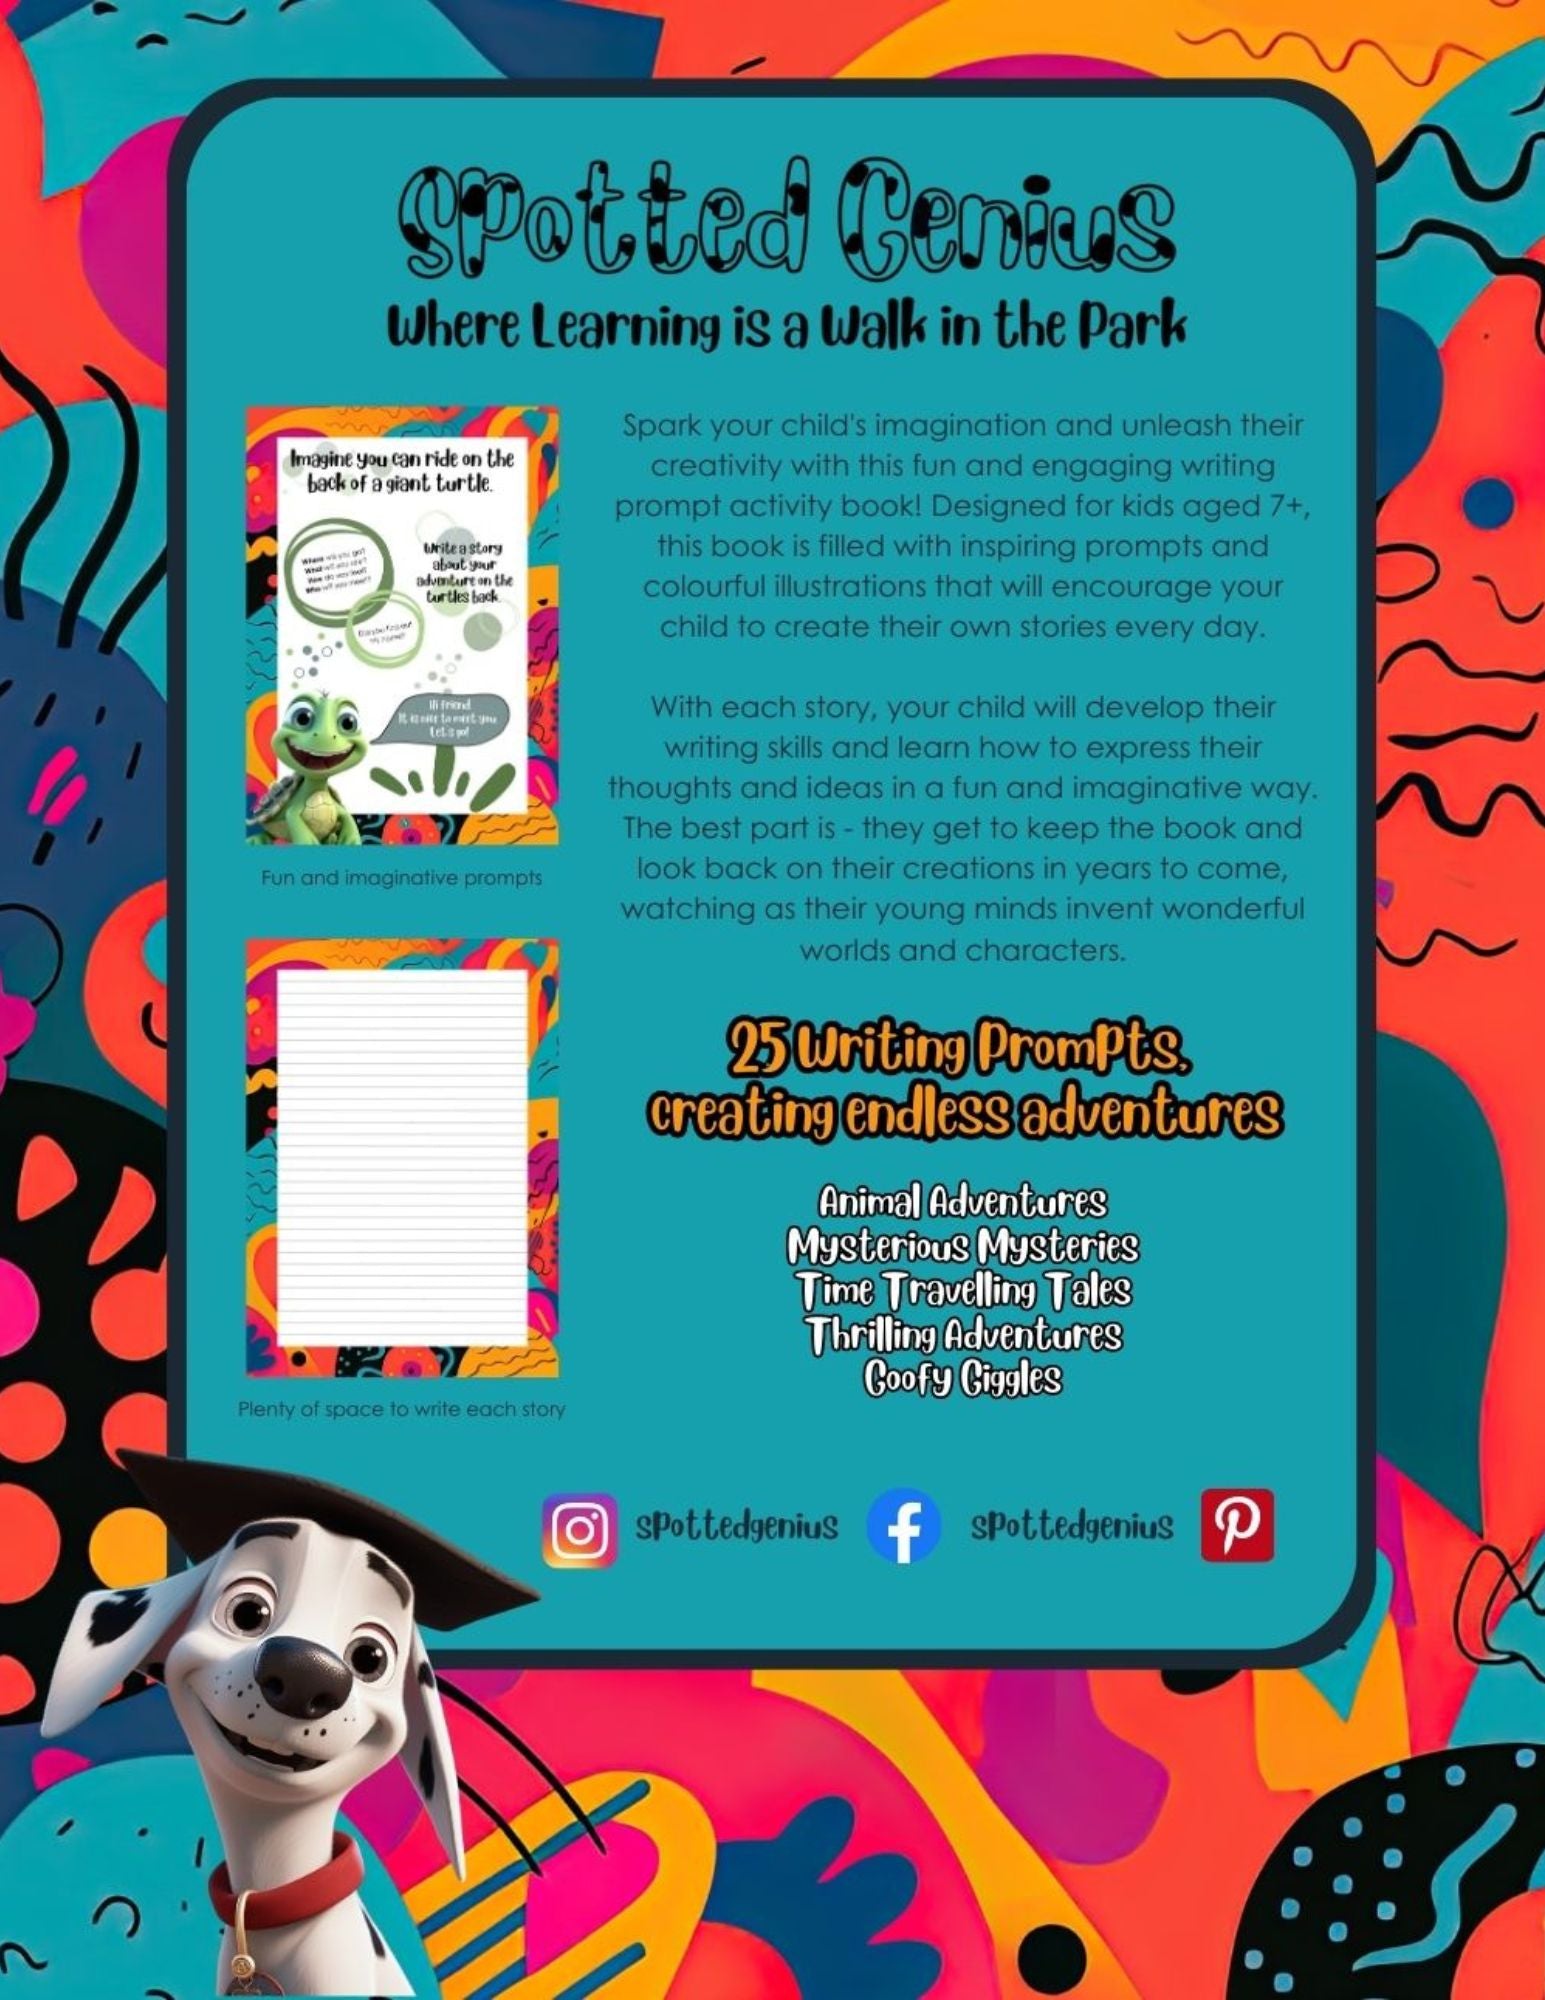 Spotted Genius Back Cover of Creative Writing Prompt Book 1 Where learning is a walk in the park